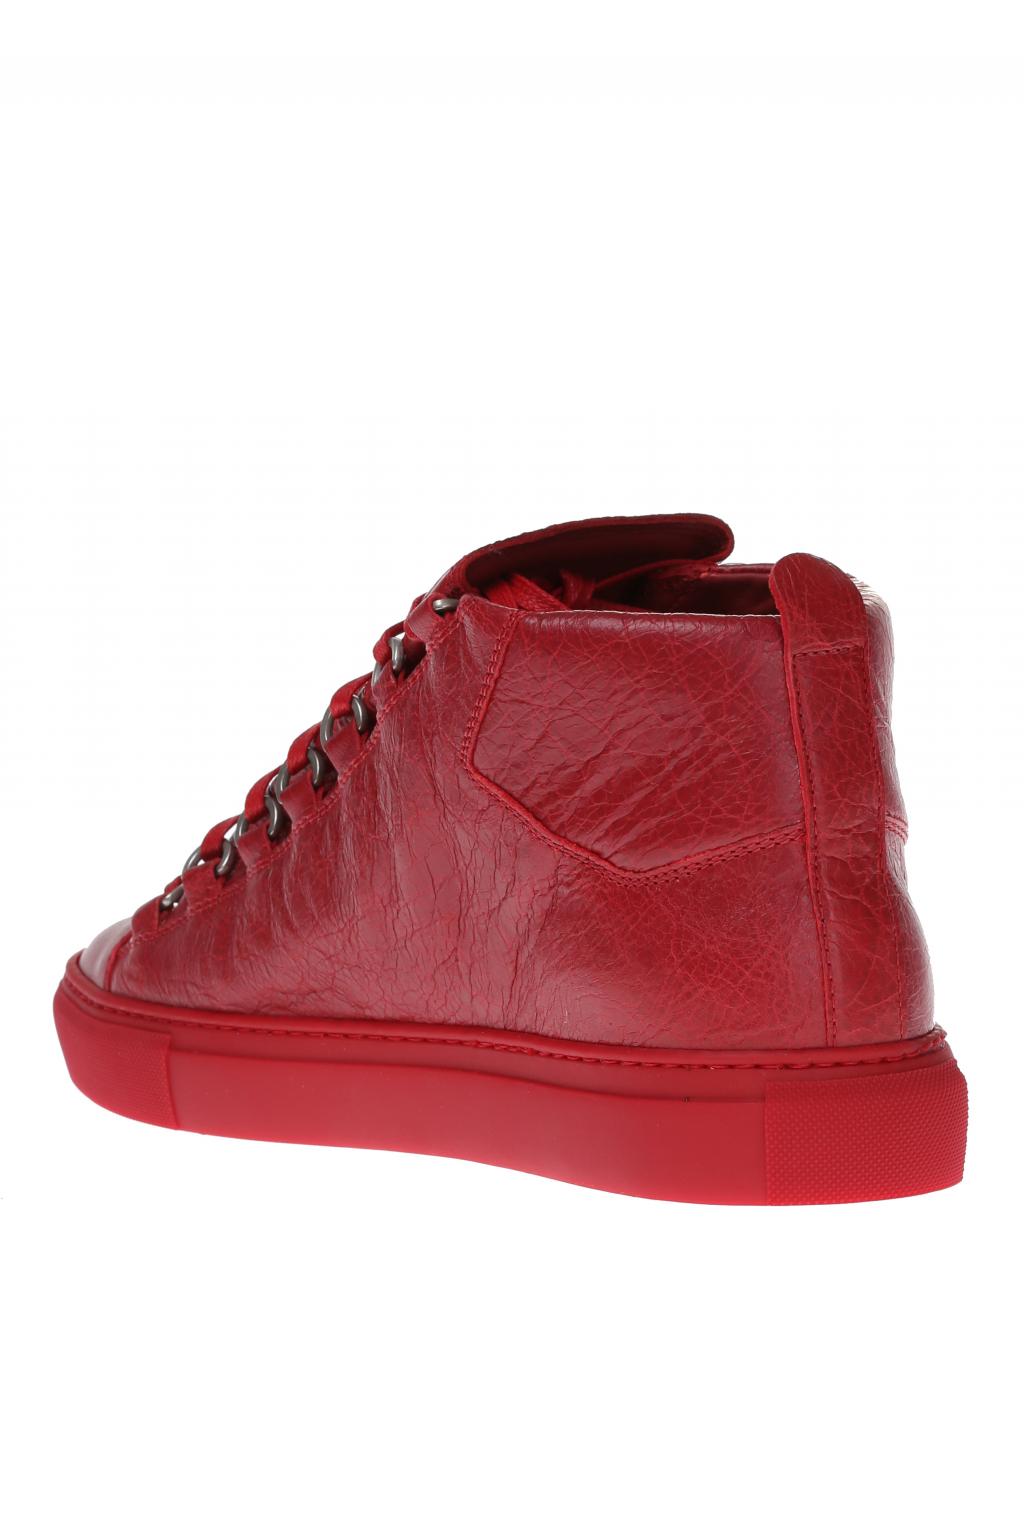 Mens Balenciaga Arena Red Leather High Top Lace Up Sneakers Shoes Sz 44  412381